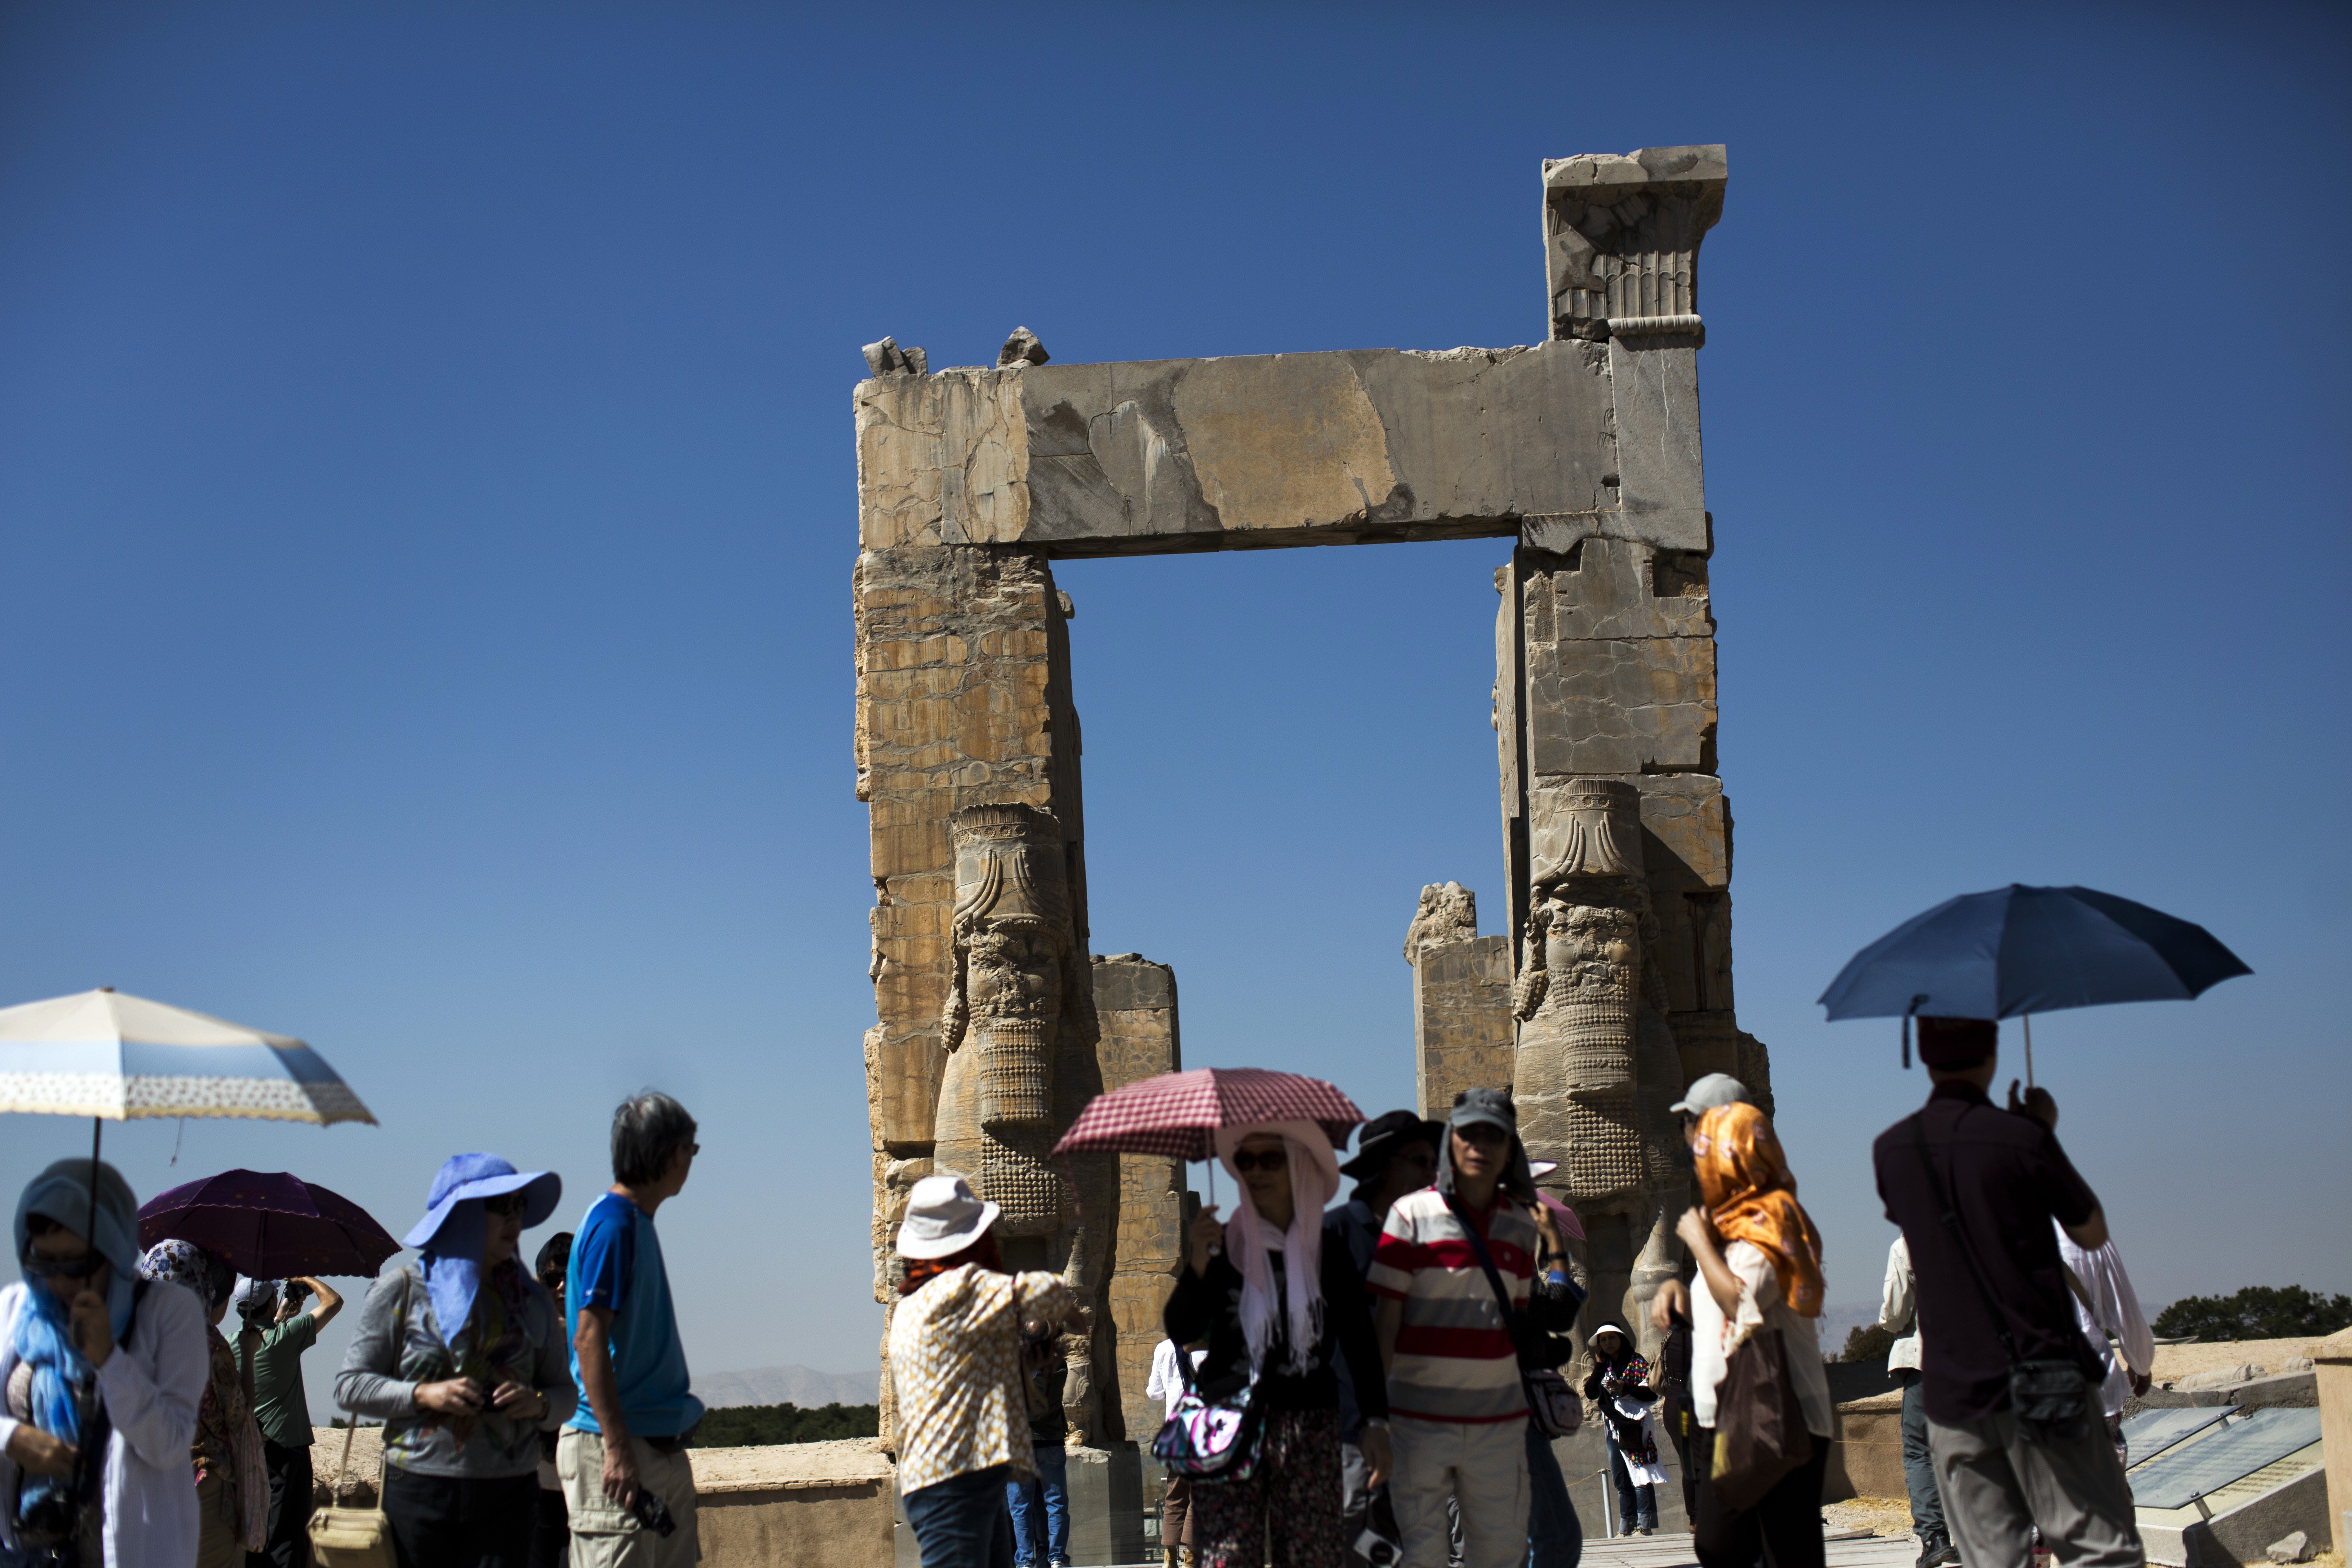 Chinese tourists visit the "Gate of All Nations" at the ancient Persian city of Persepolis near Shiraz in southern Iran, which is hoping to dramatically increase the number of visitors from China with a new visa waiver programme. Photo: AFP